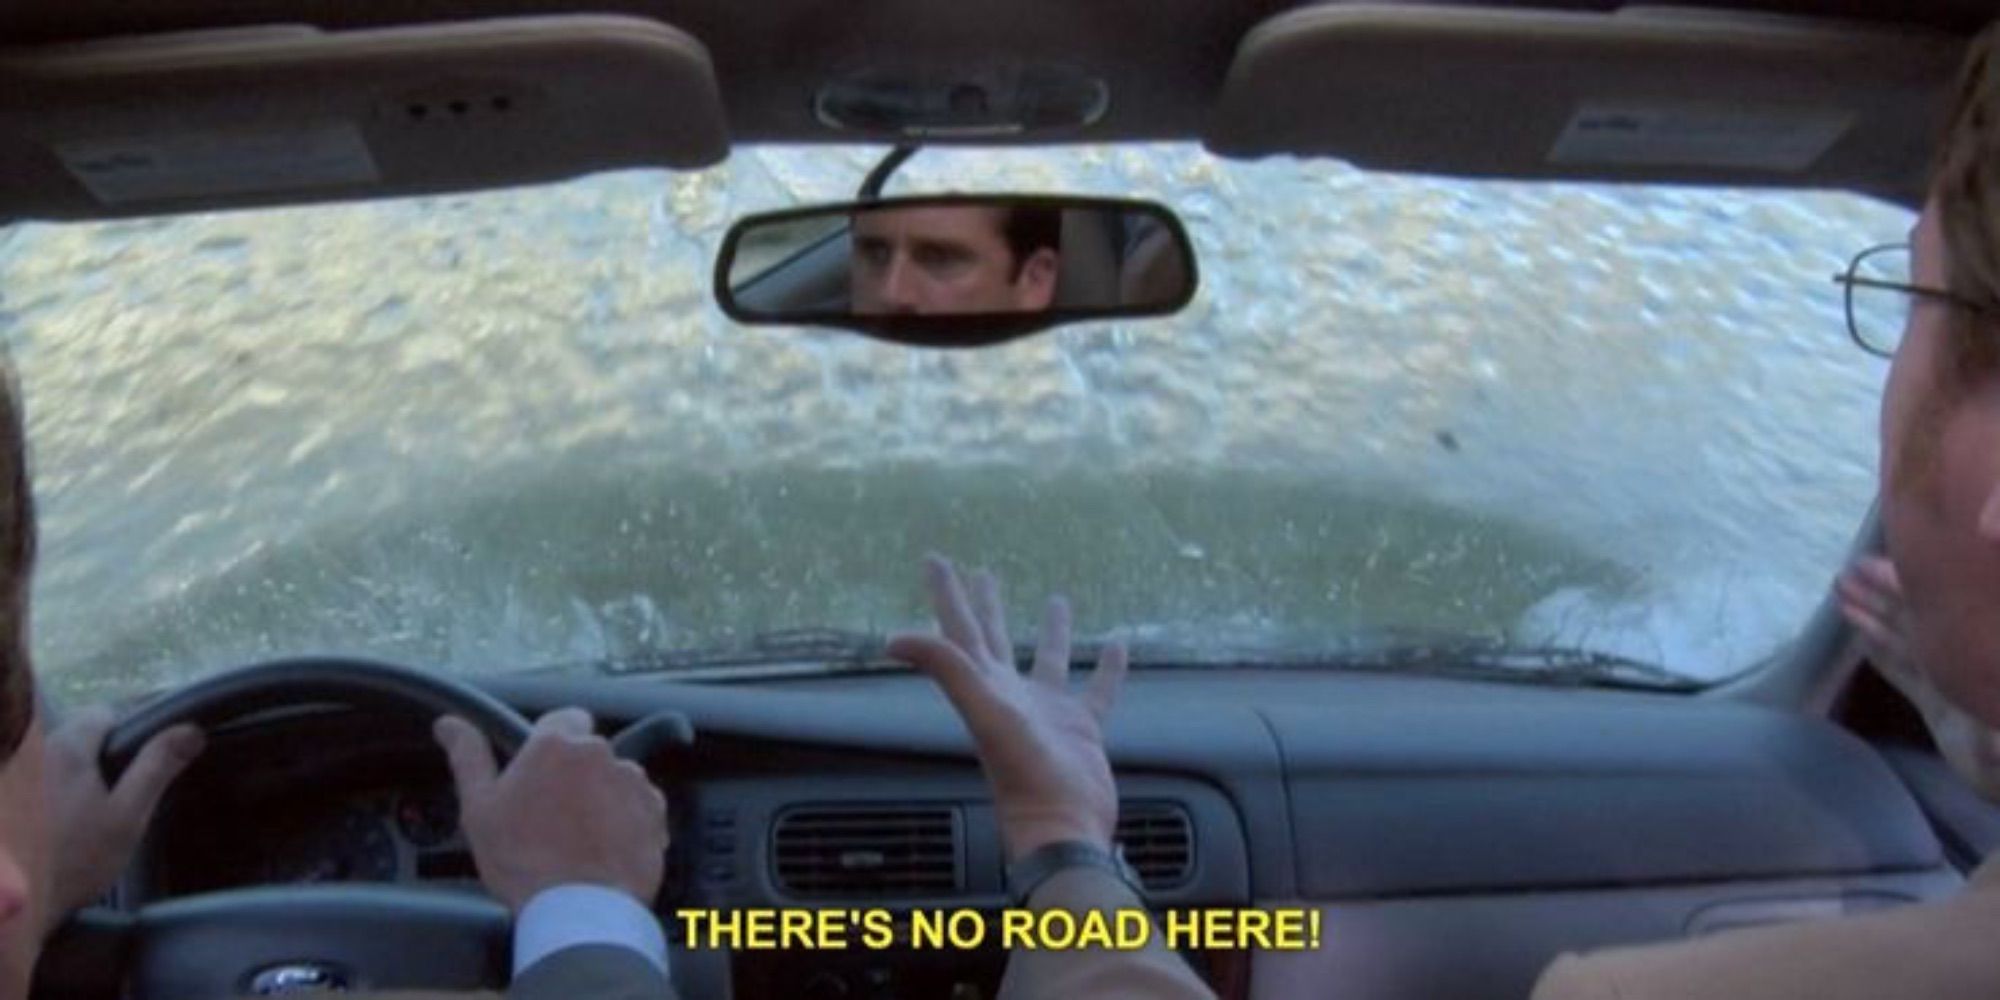 Michael and Dwight drive into a lake in The Office